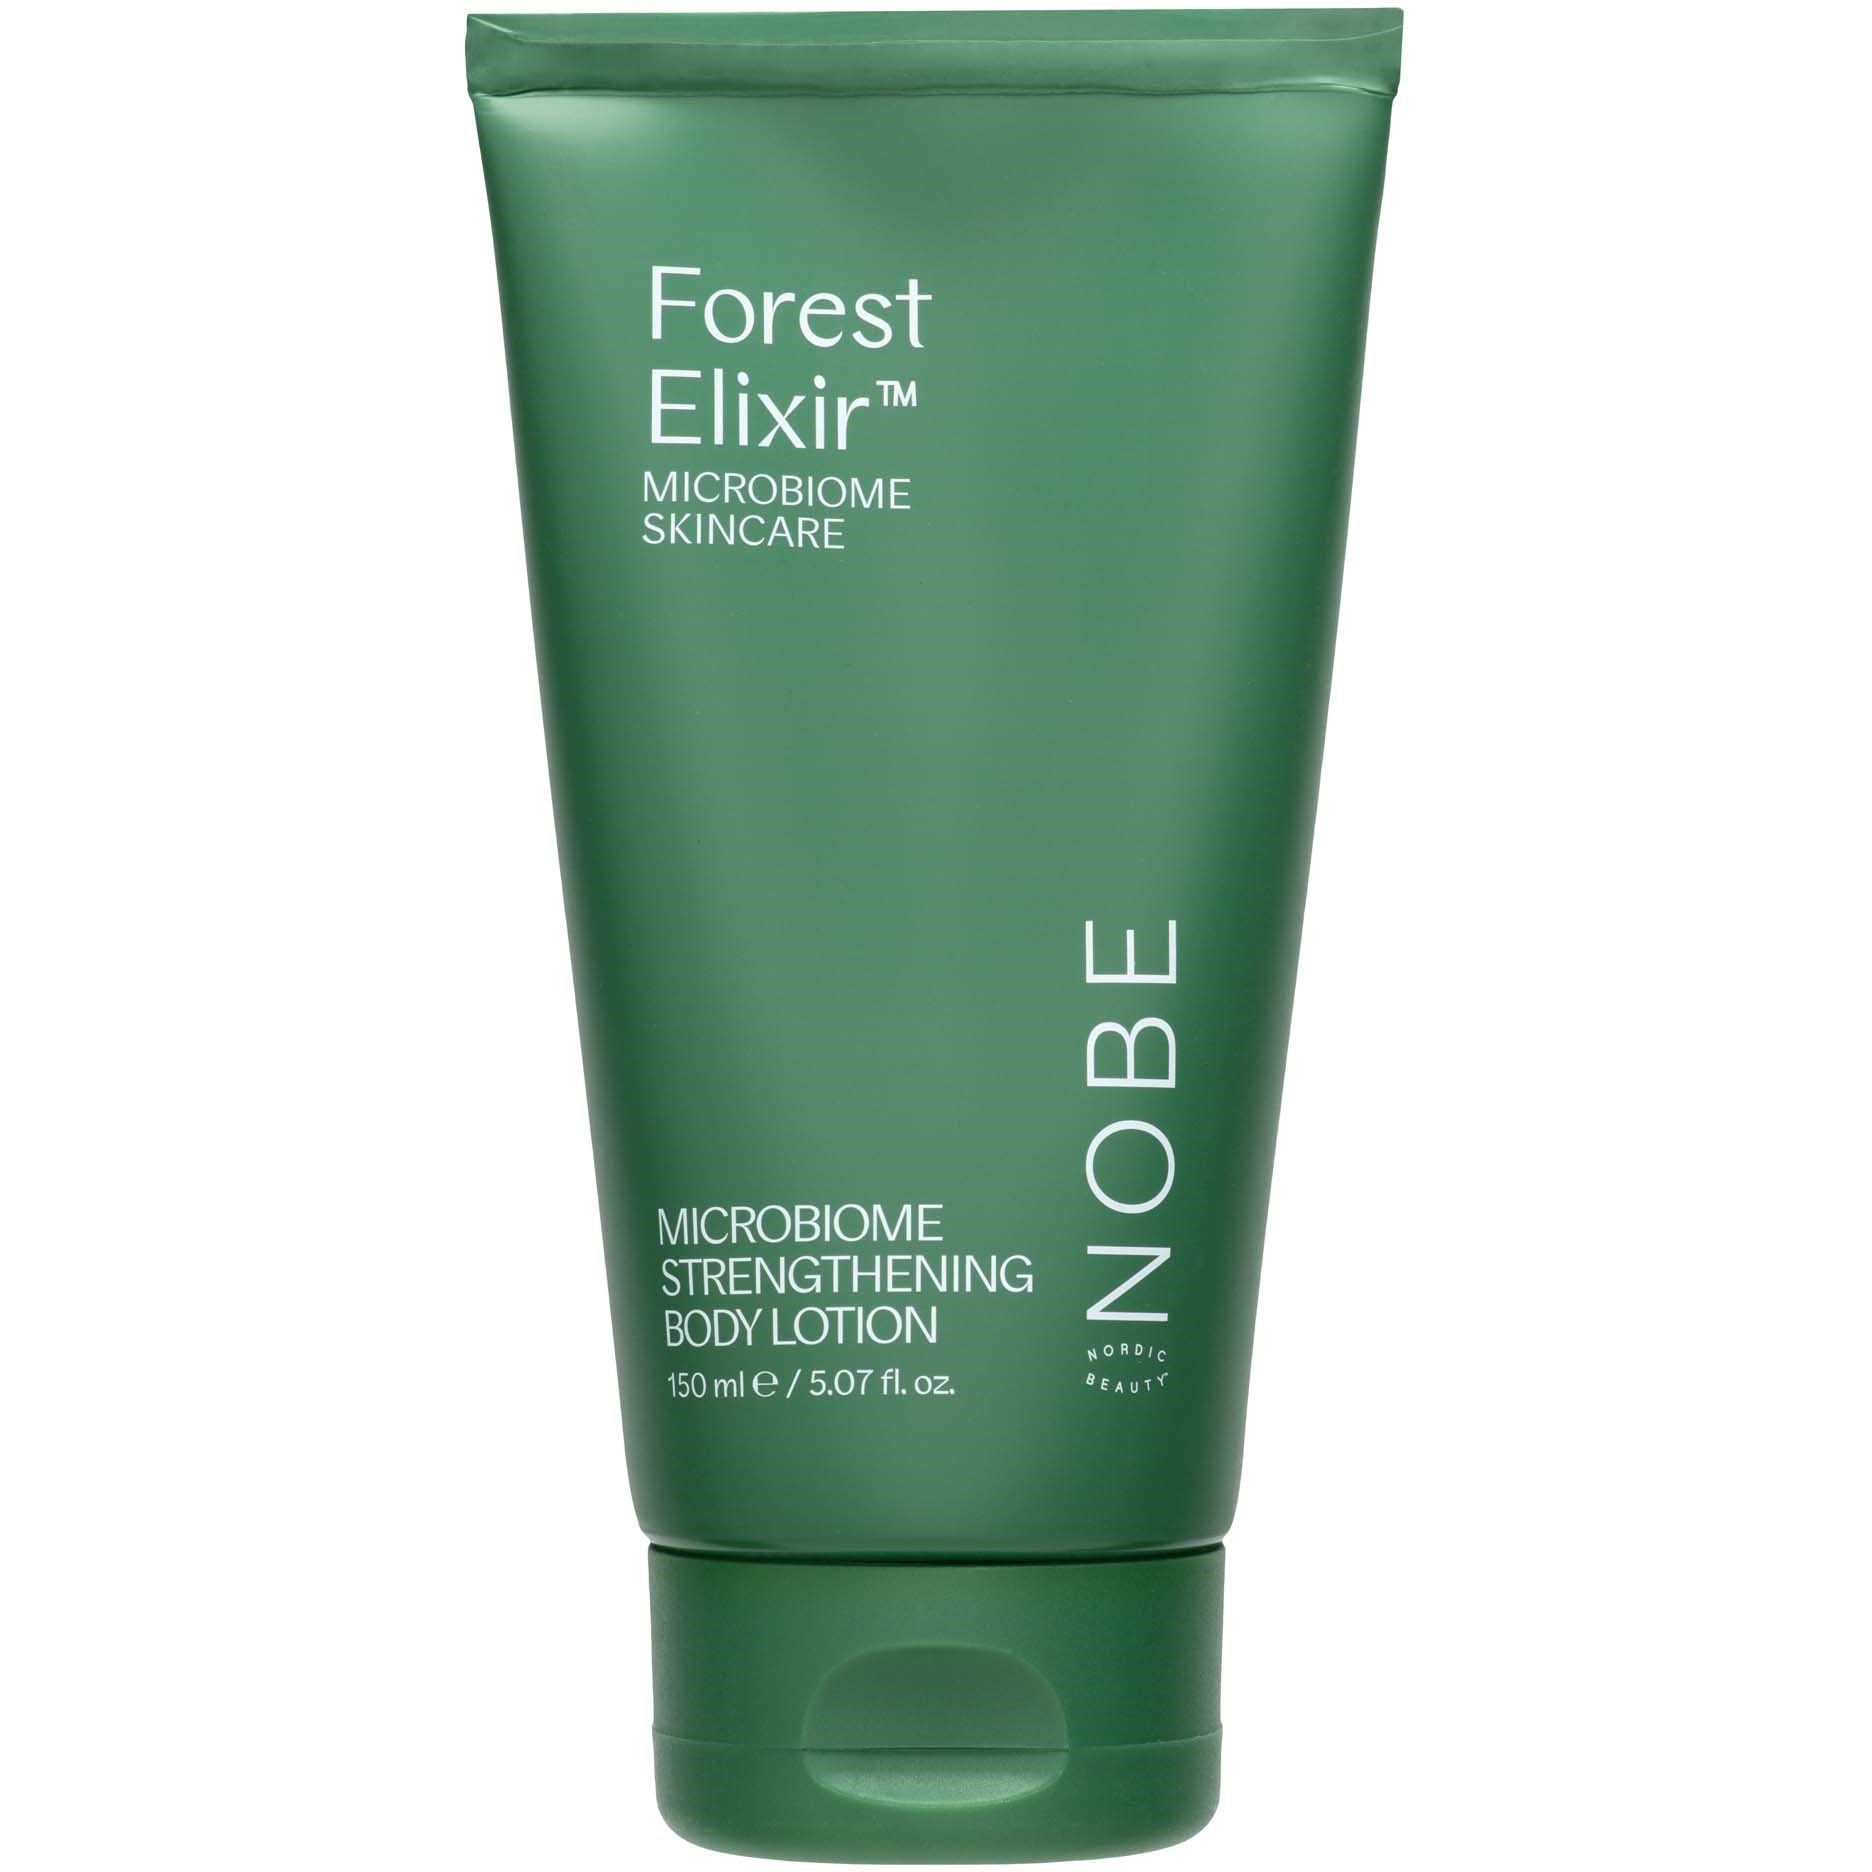 NOBE Forest Elixir™ Microbiome Strengthening Body Lotion 150 ml